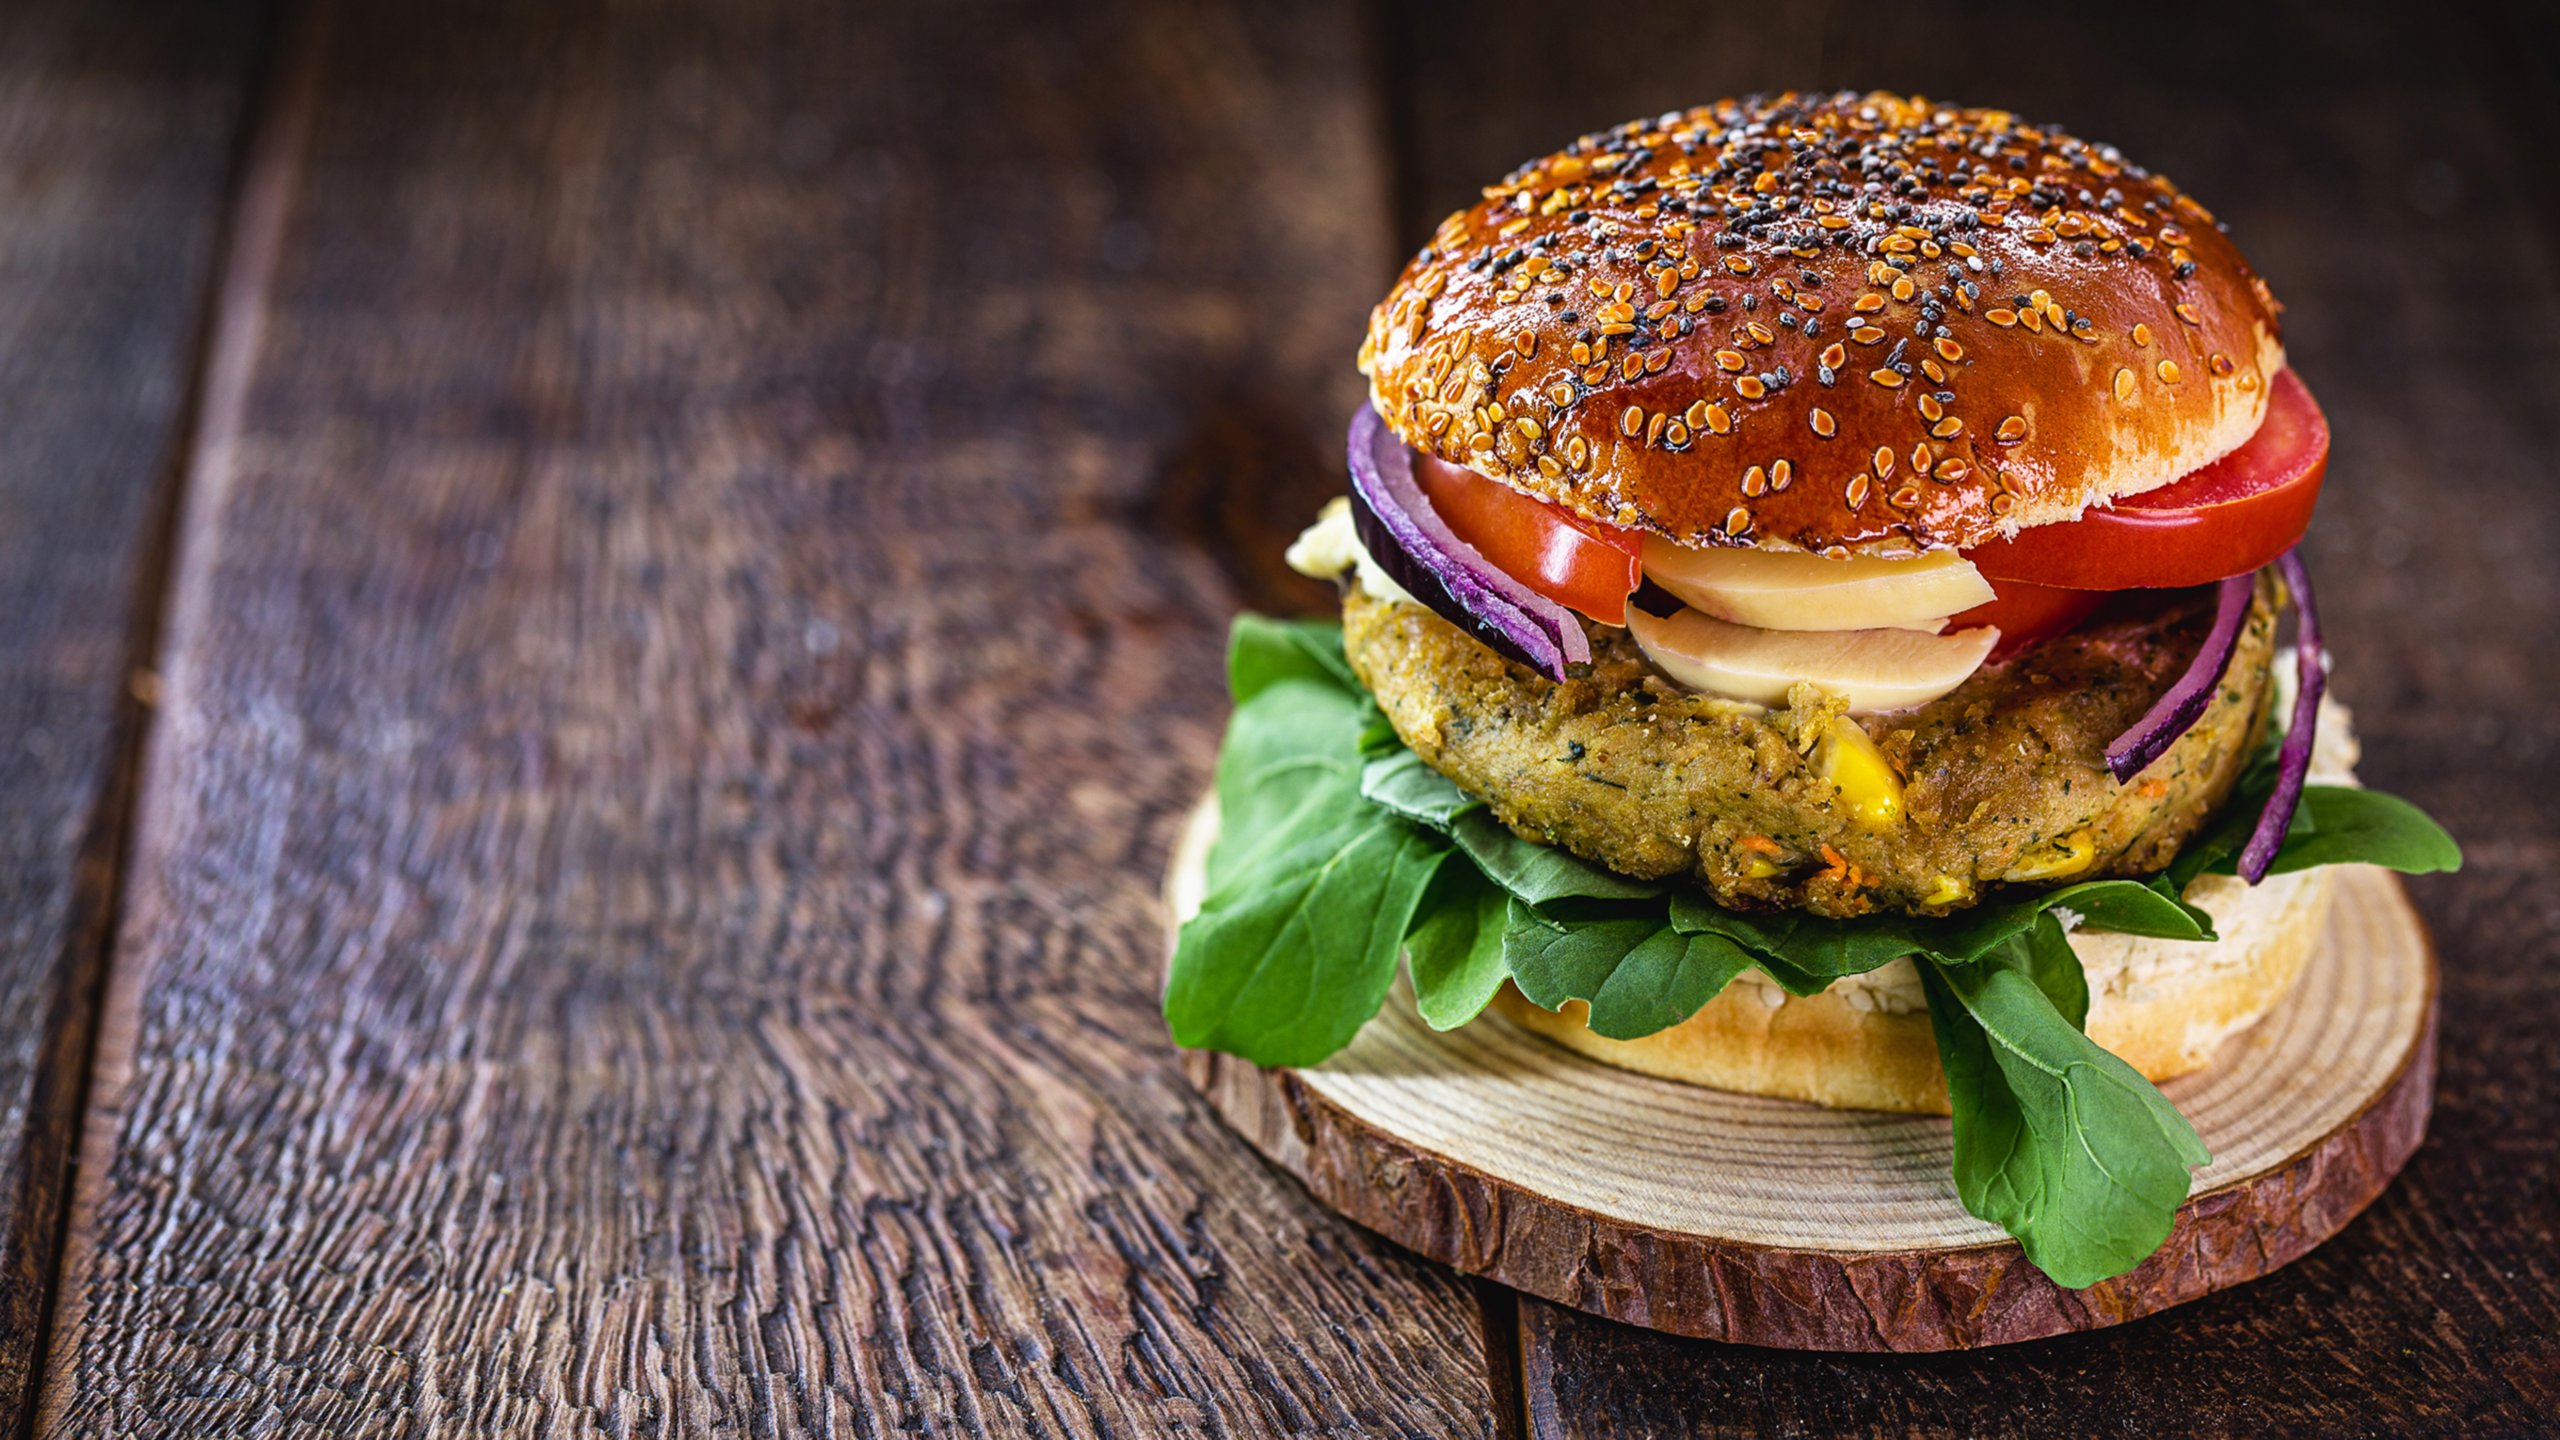 Plant-based meat burger on a sesame seed bun with tomatoes, mushrooms, onions and lettuce. The burger is on a wooden plate, sitting on a wooden table. The burger is on the right side of the image.